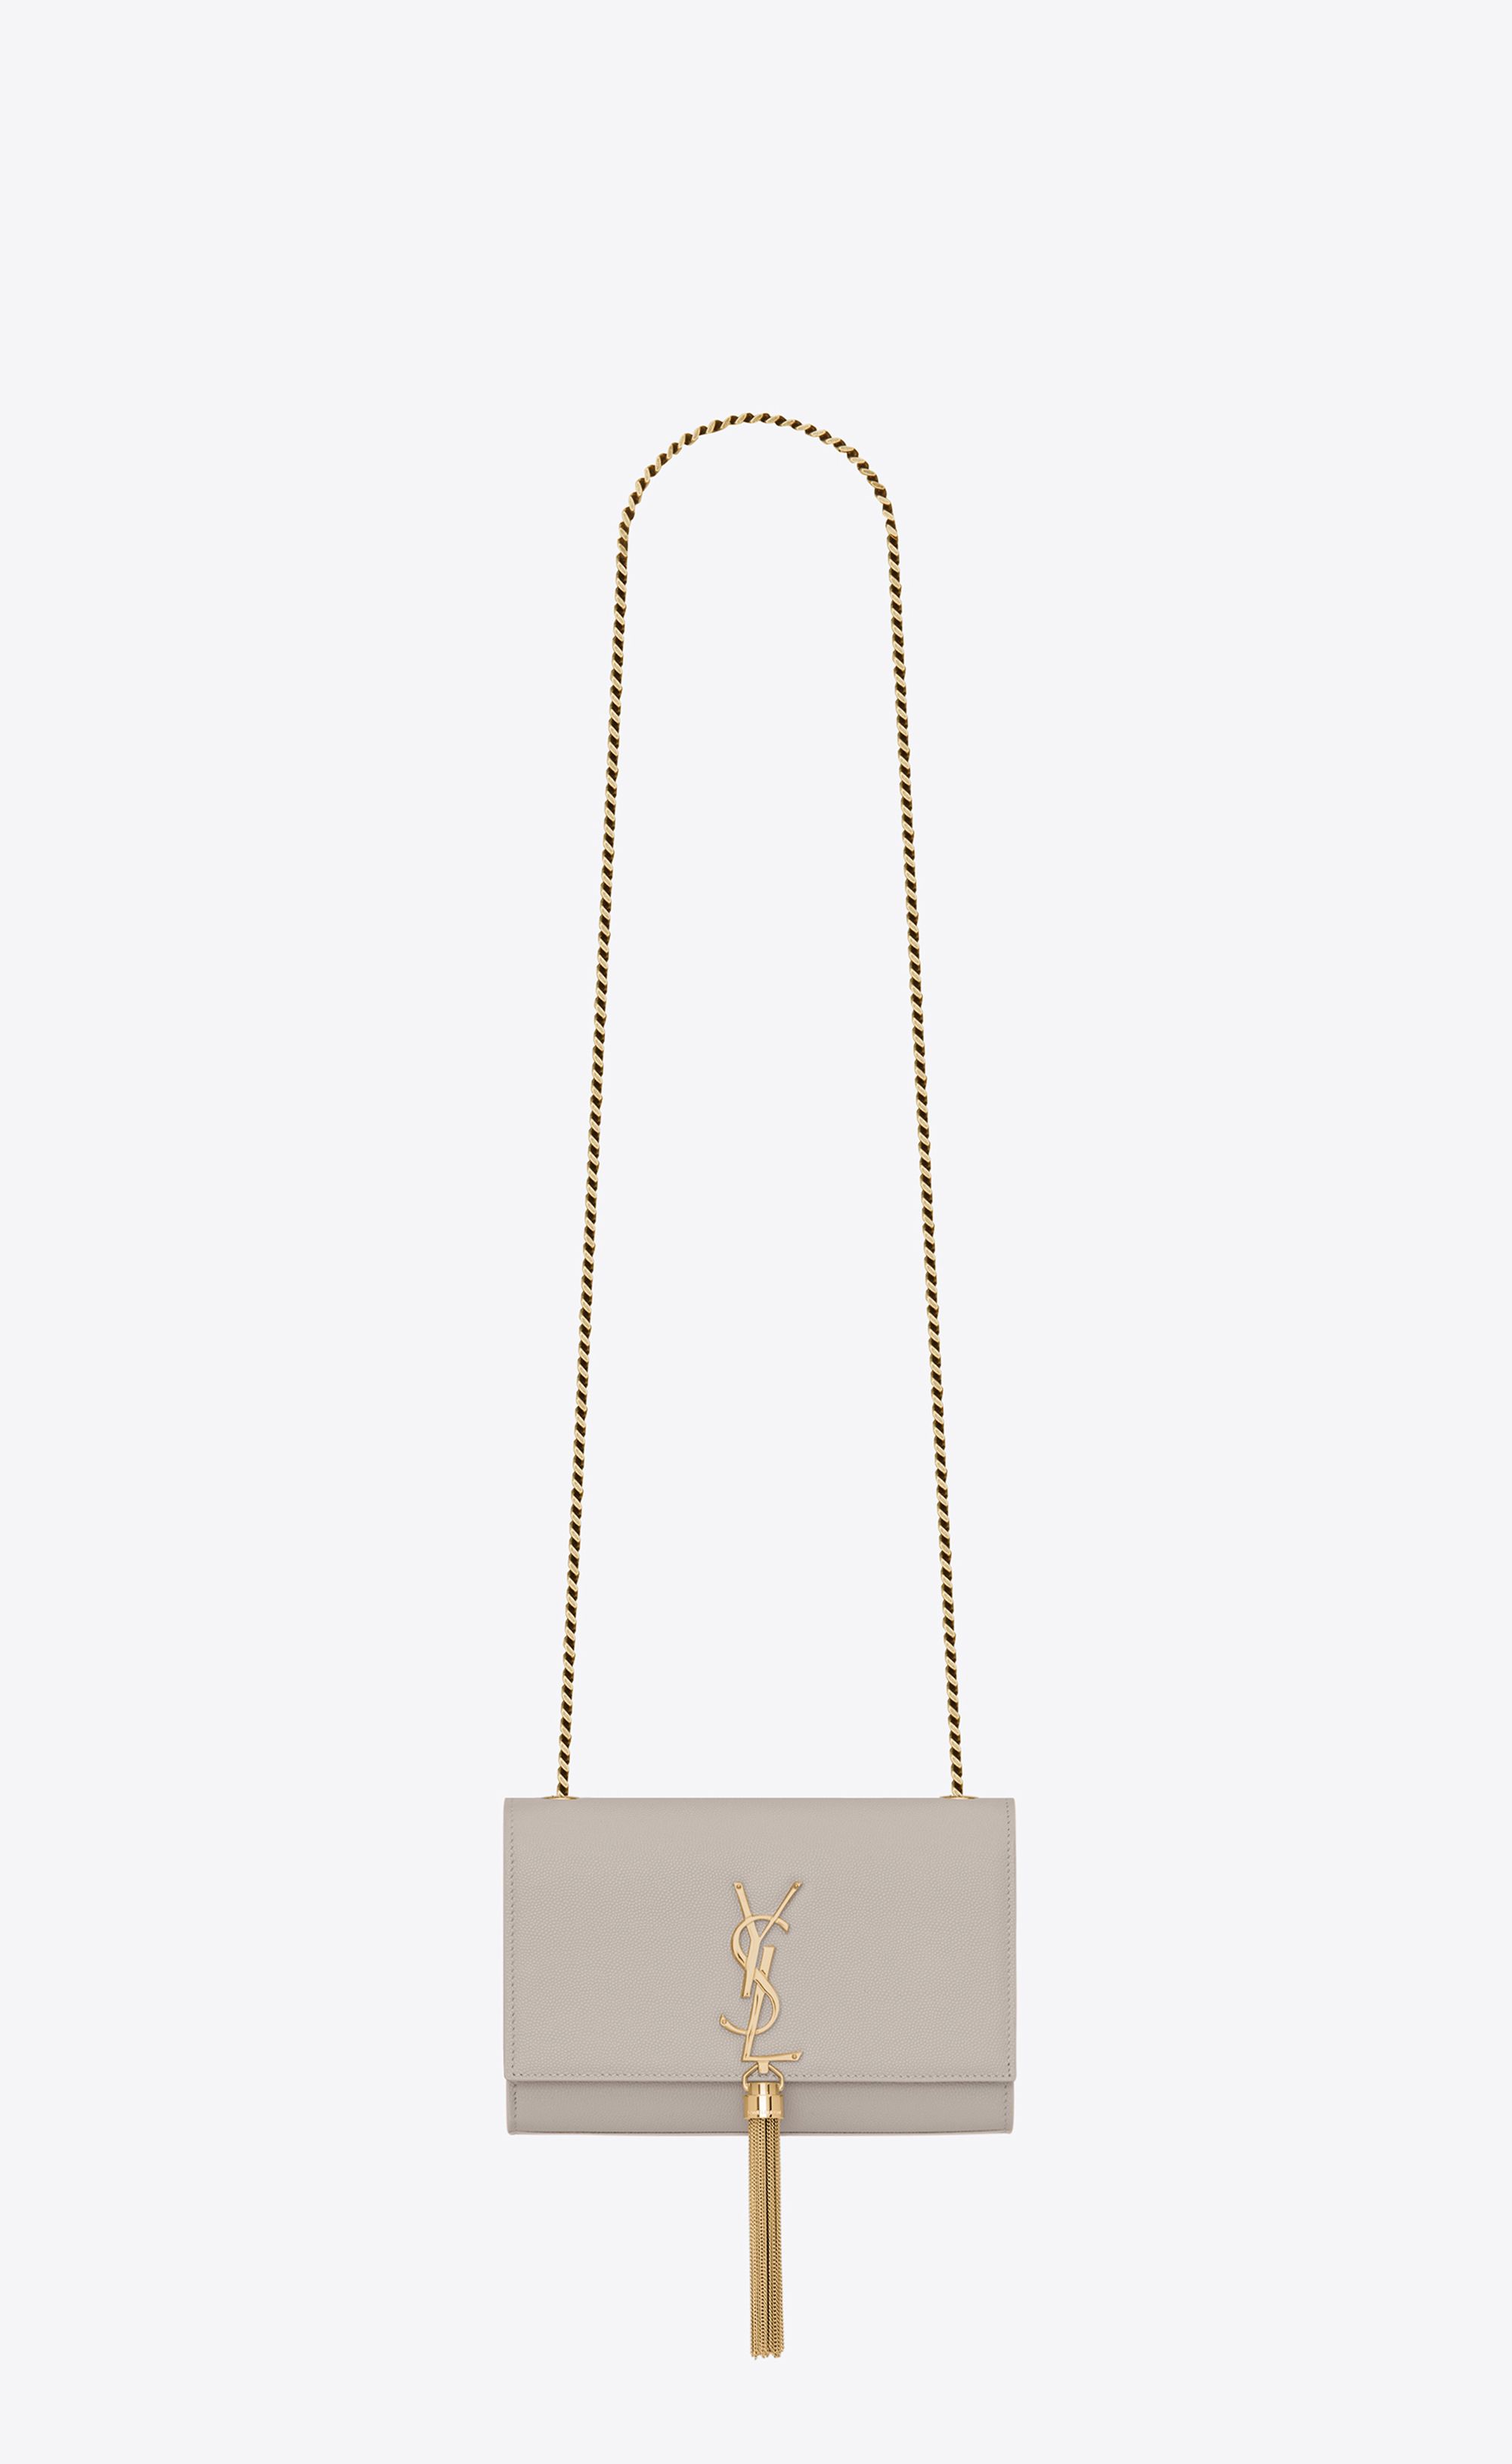 Monogram Kate Small Kate Bag With Leather Tassel In Grain De Poudre Embossed Leather Ivory Onesize | Saint Laurent Inc. (Global)